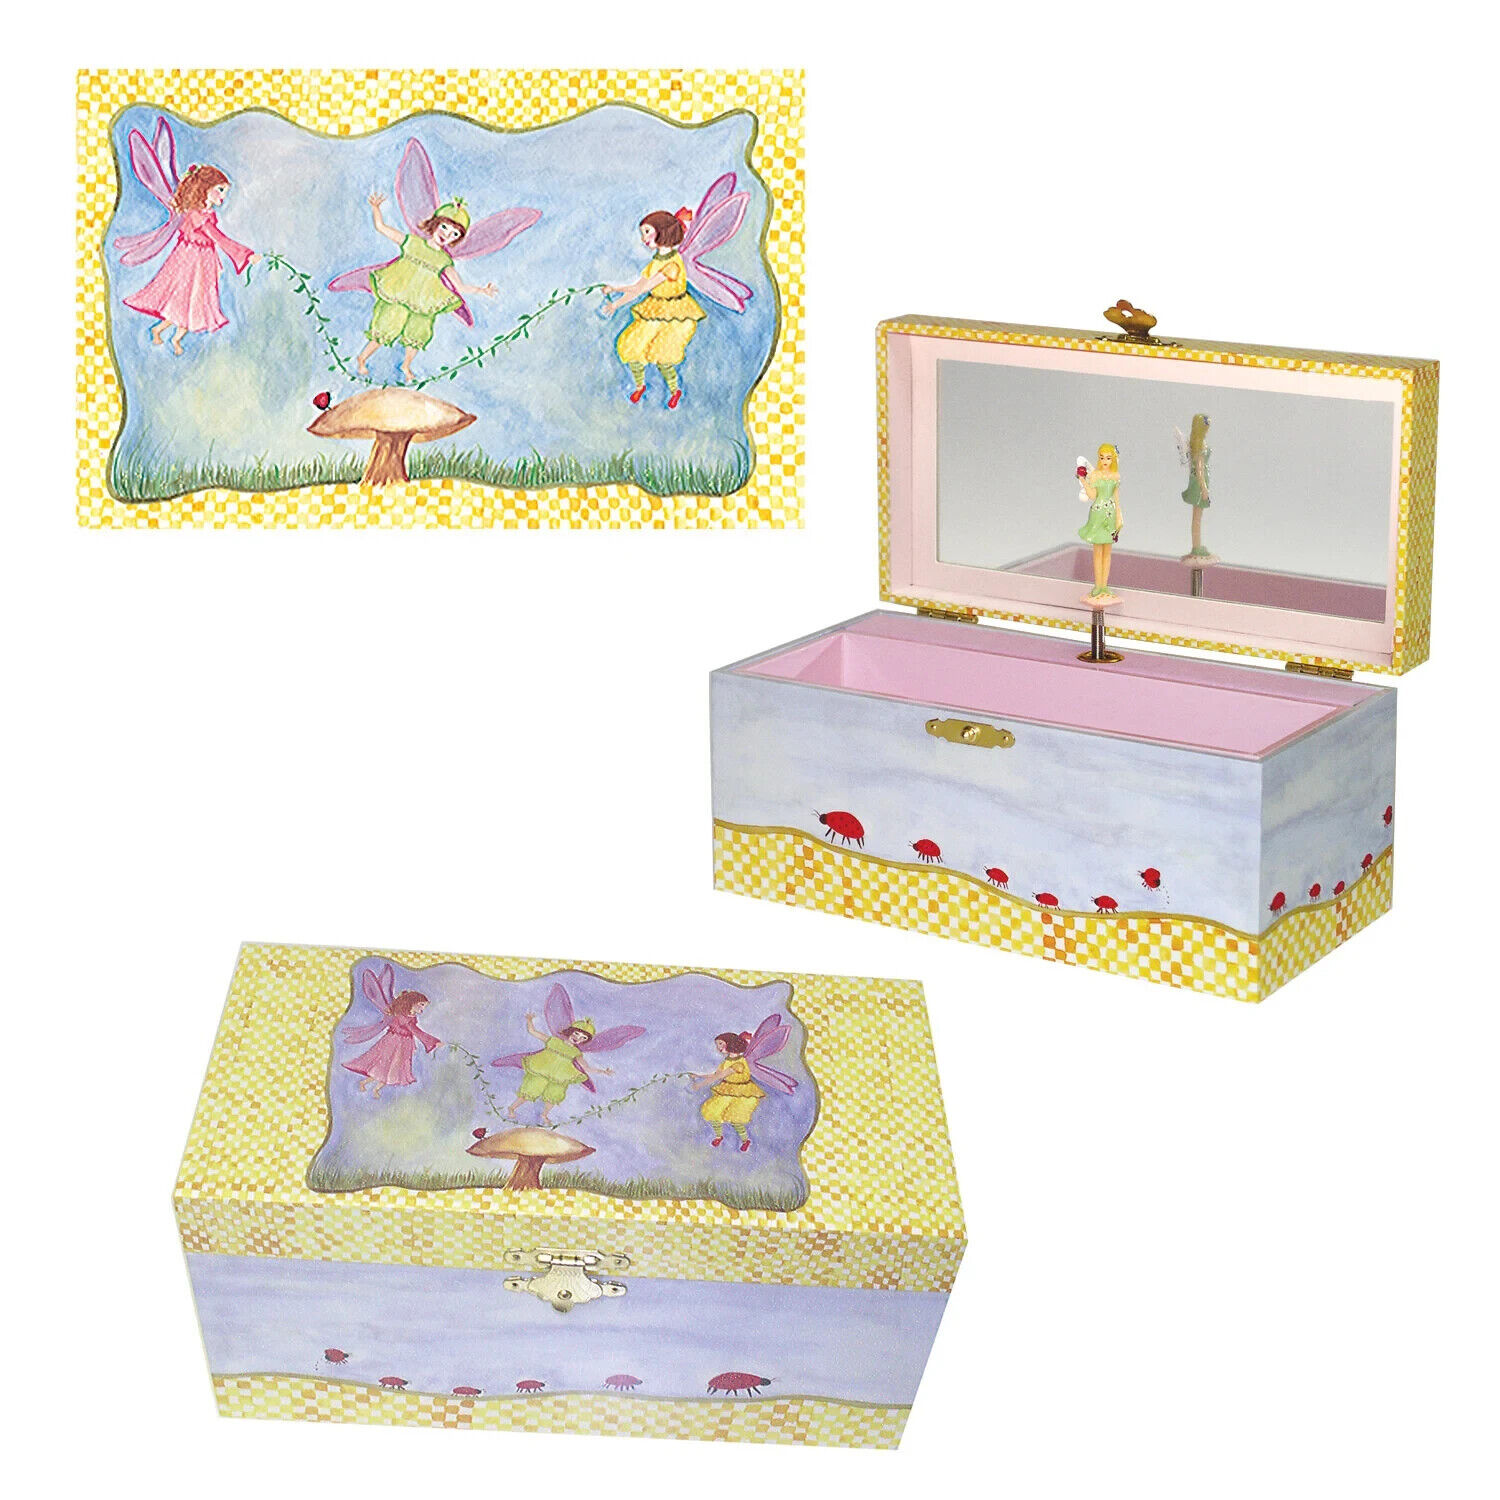 Enchantmints Stowaway Melody Box: Magical musical jewelry storage for kids